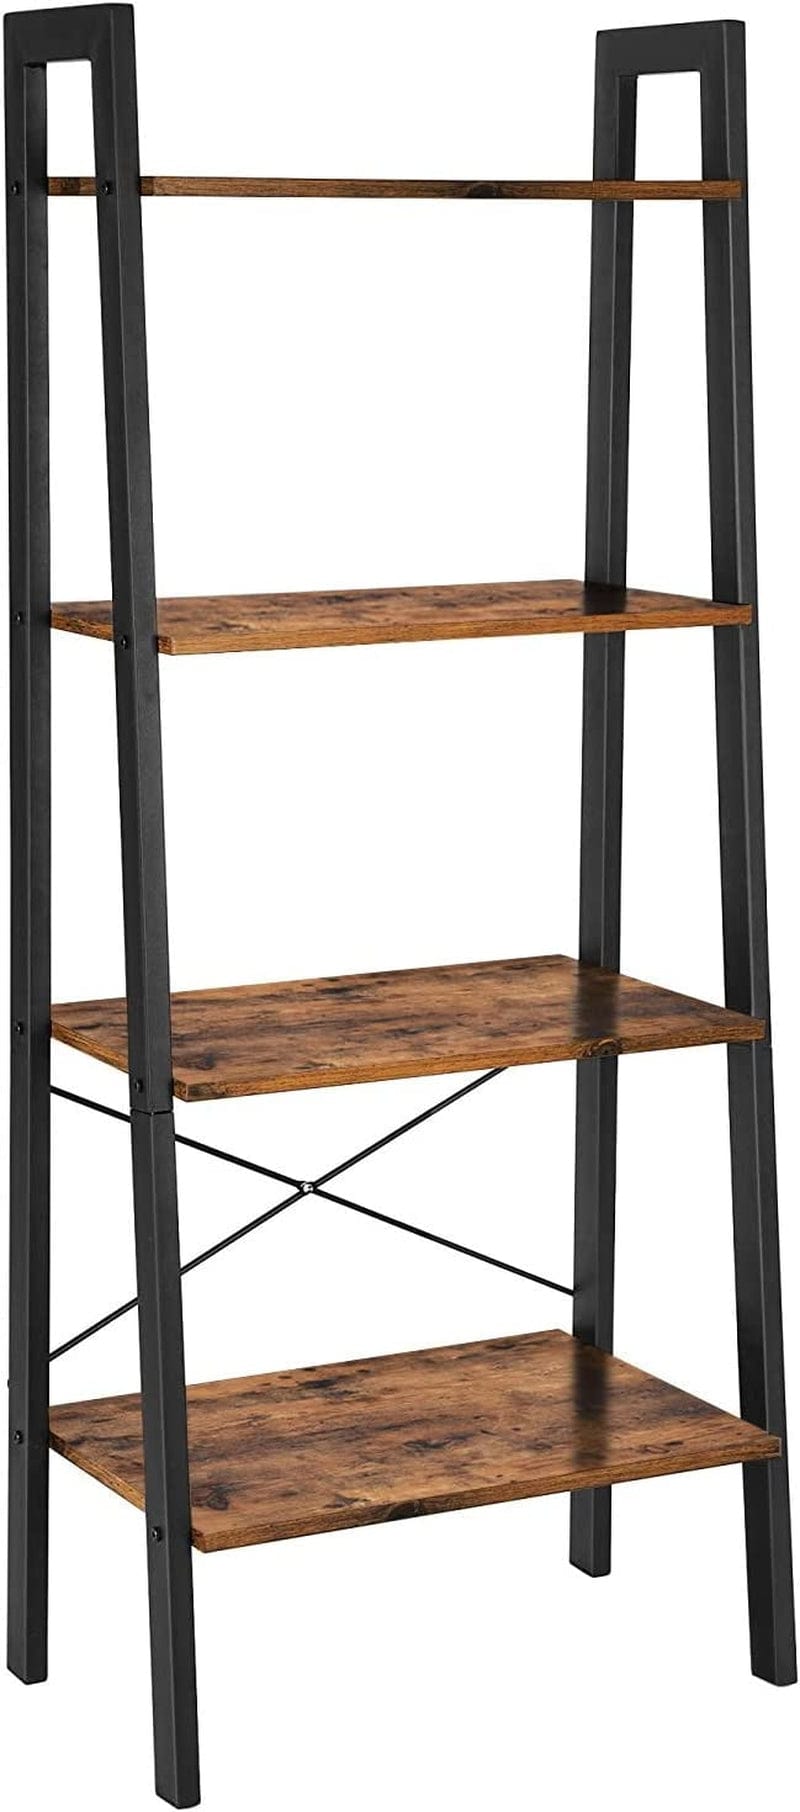 VASAGLE Ladder Shelf, 4-Tier Bookshelf, Storage Rack, Bookcase with Steel Frame, for Living Room, Home Office, Kitchen, Bedroom, Industrial Style, Rustic Brown and Black ULLS44X Home & Garden > Household Supplies > Storage & Organization VASAGLE Rustic Brown + Black  